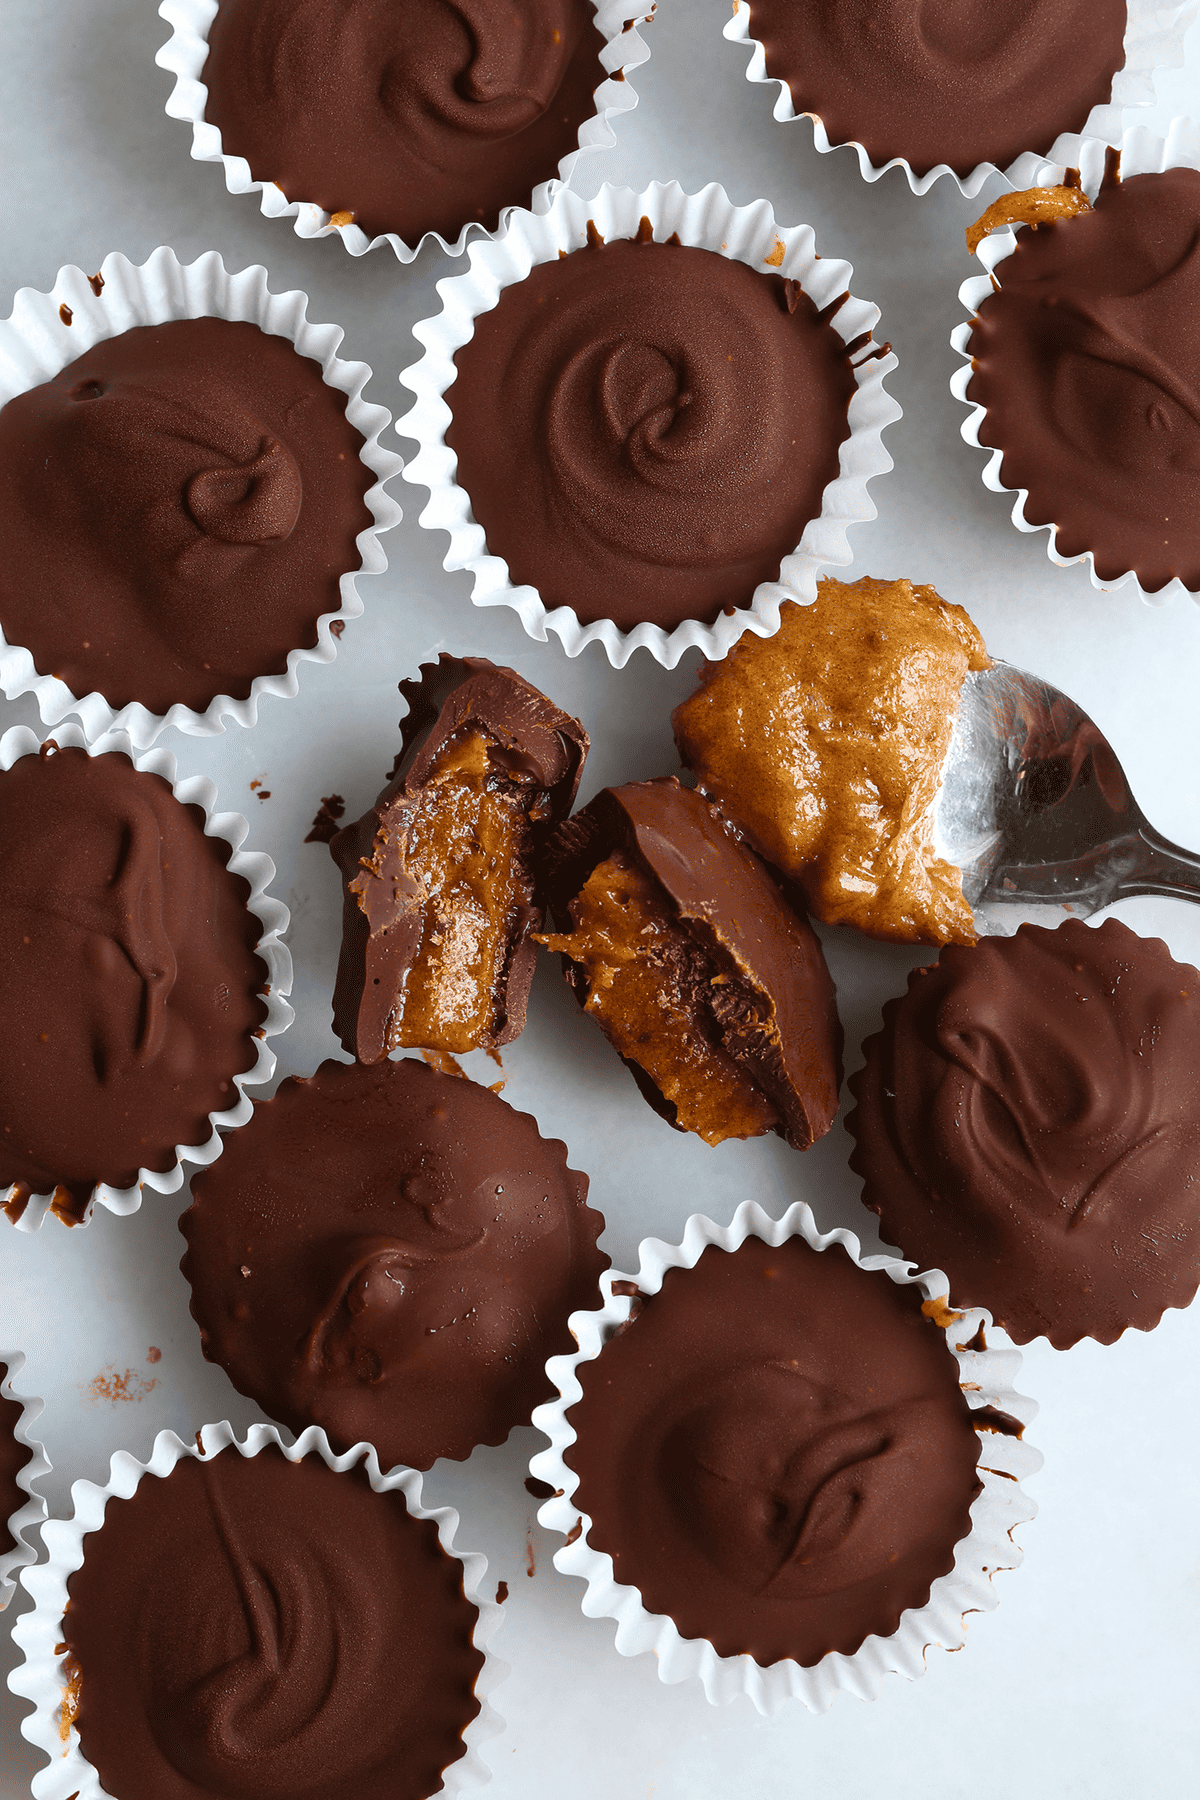 Super quick and easy, 6 ingredient vegan Chocolate Caramel Cups! No baking required for this chocolaty gooey caramel treat!!